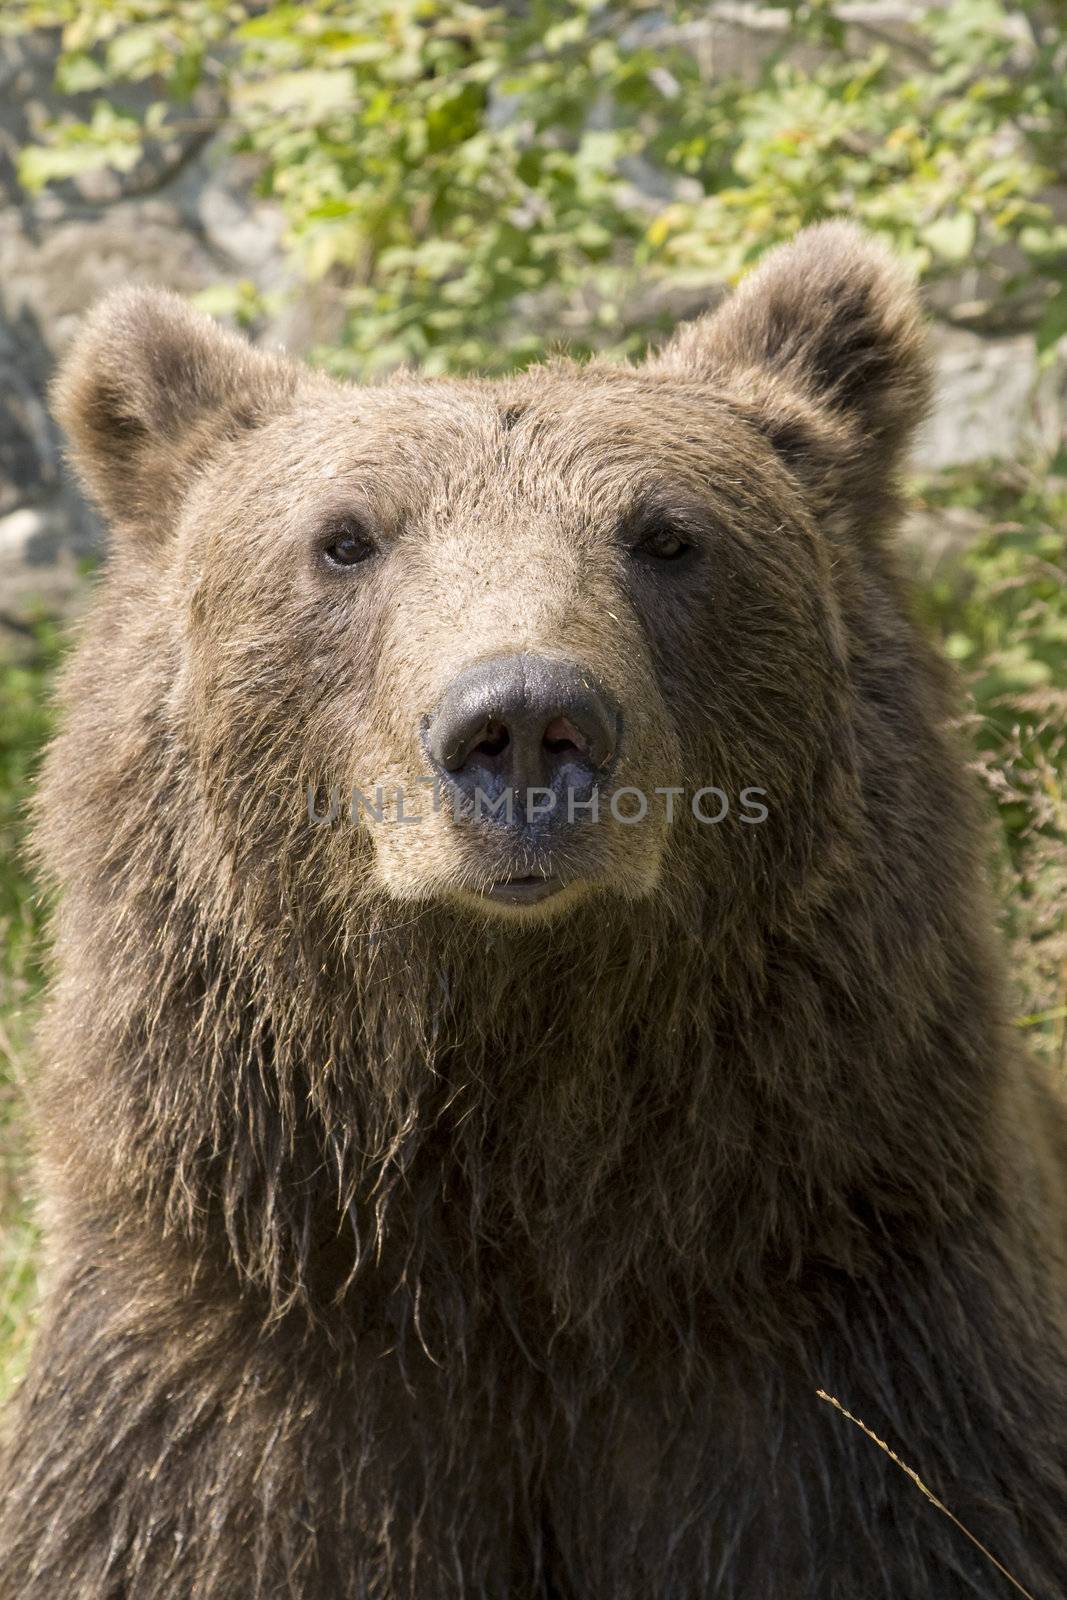 Wild Bear Cooling In Water by MihaiDancaescu